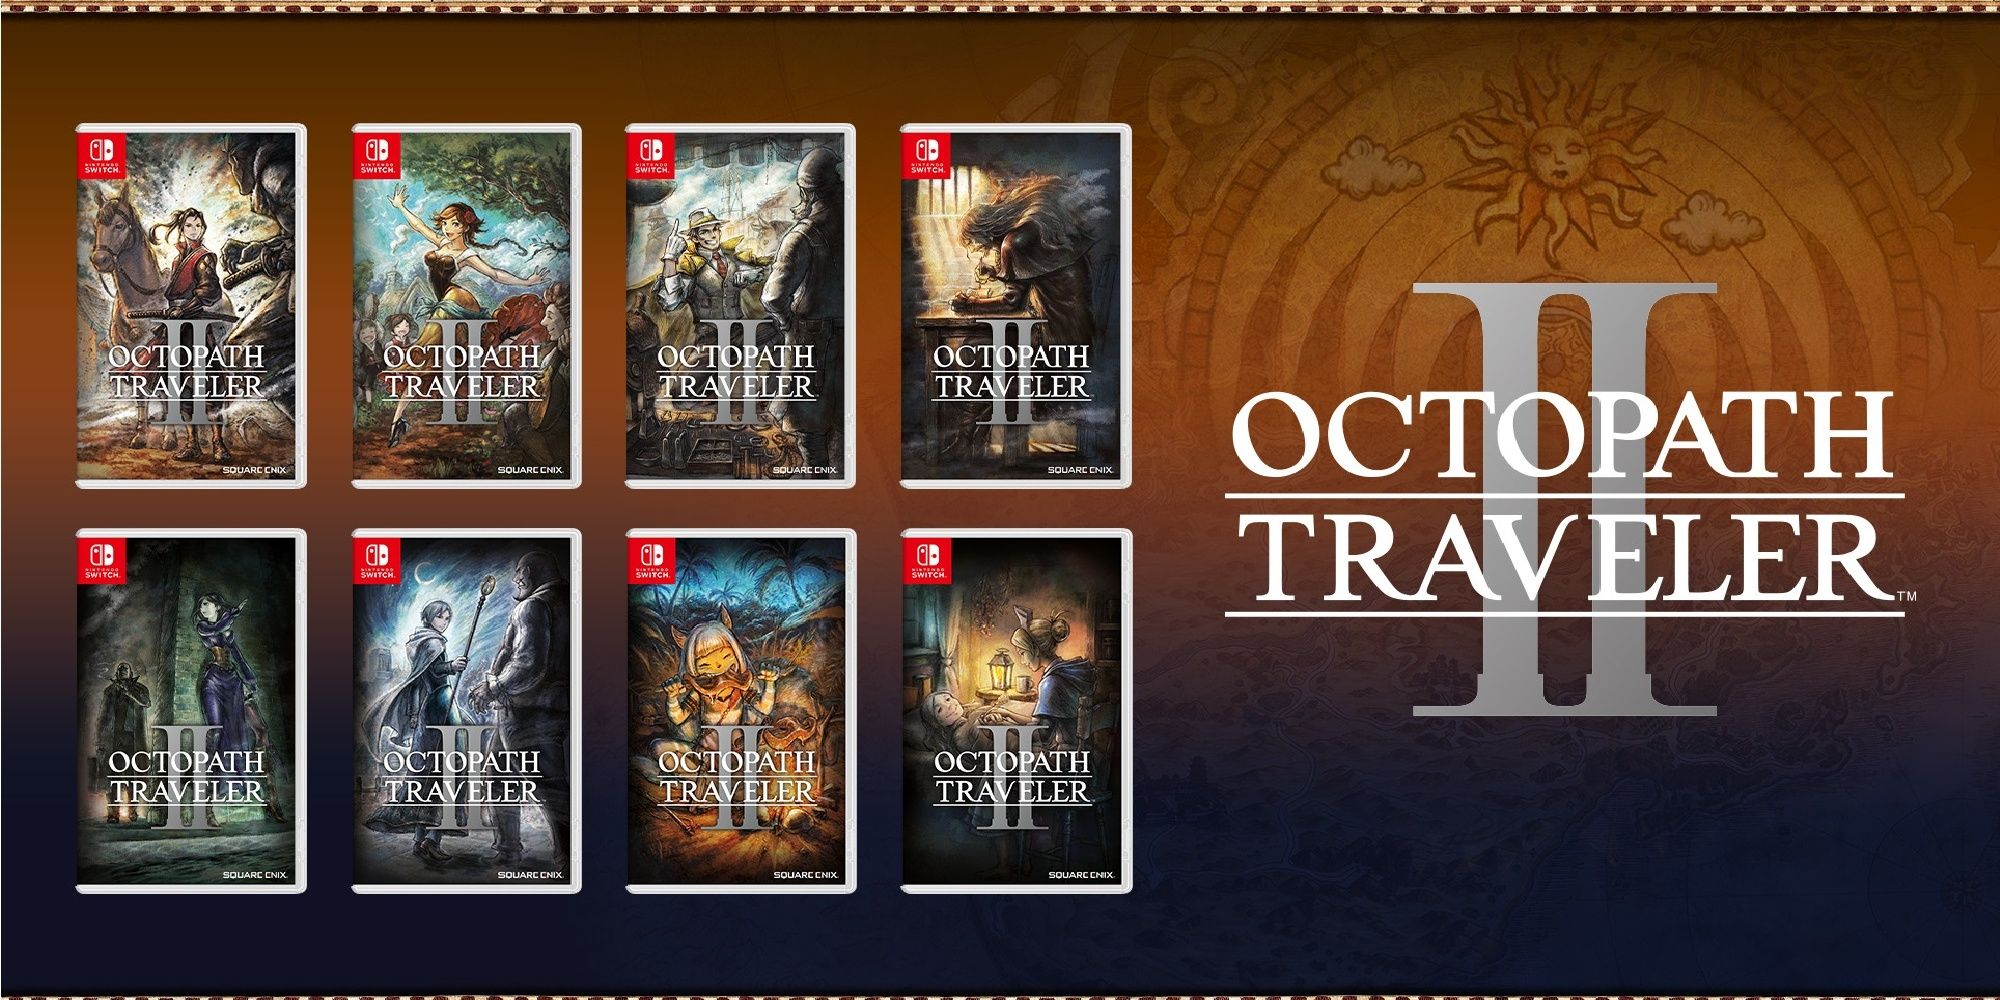 Octopath Traveler 2 alternate cover art for all eight main characters